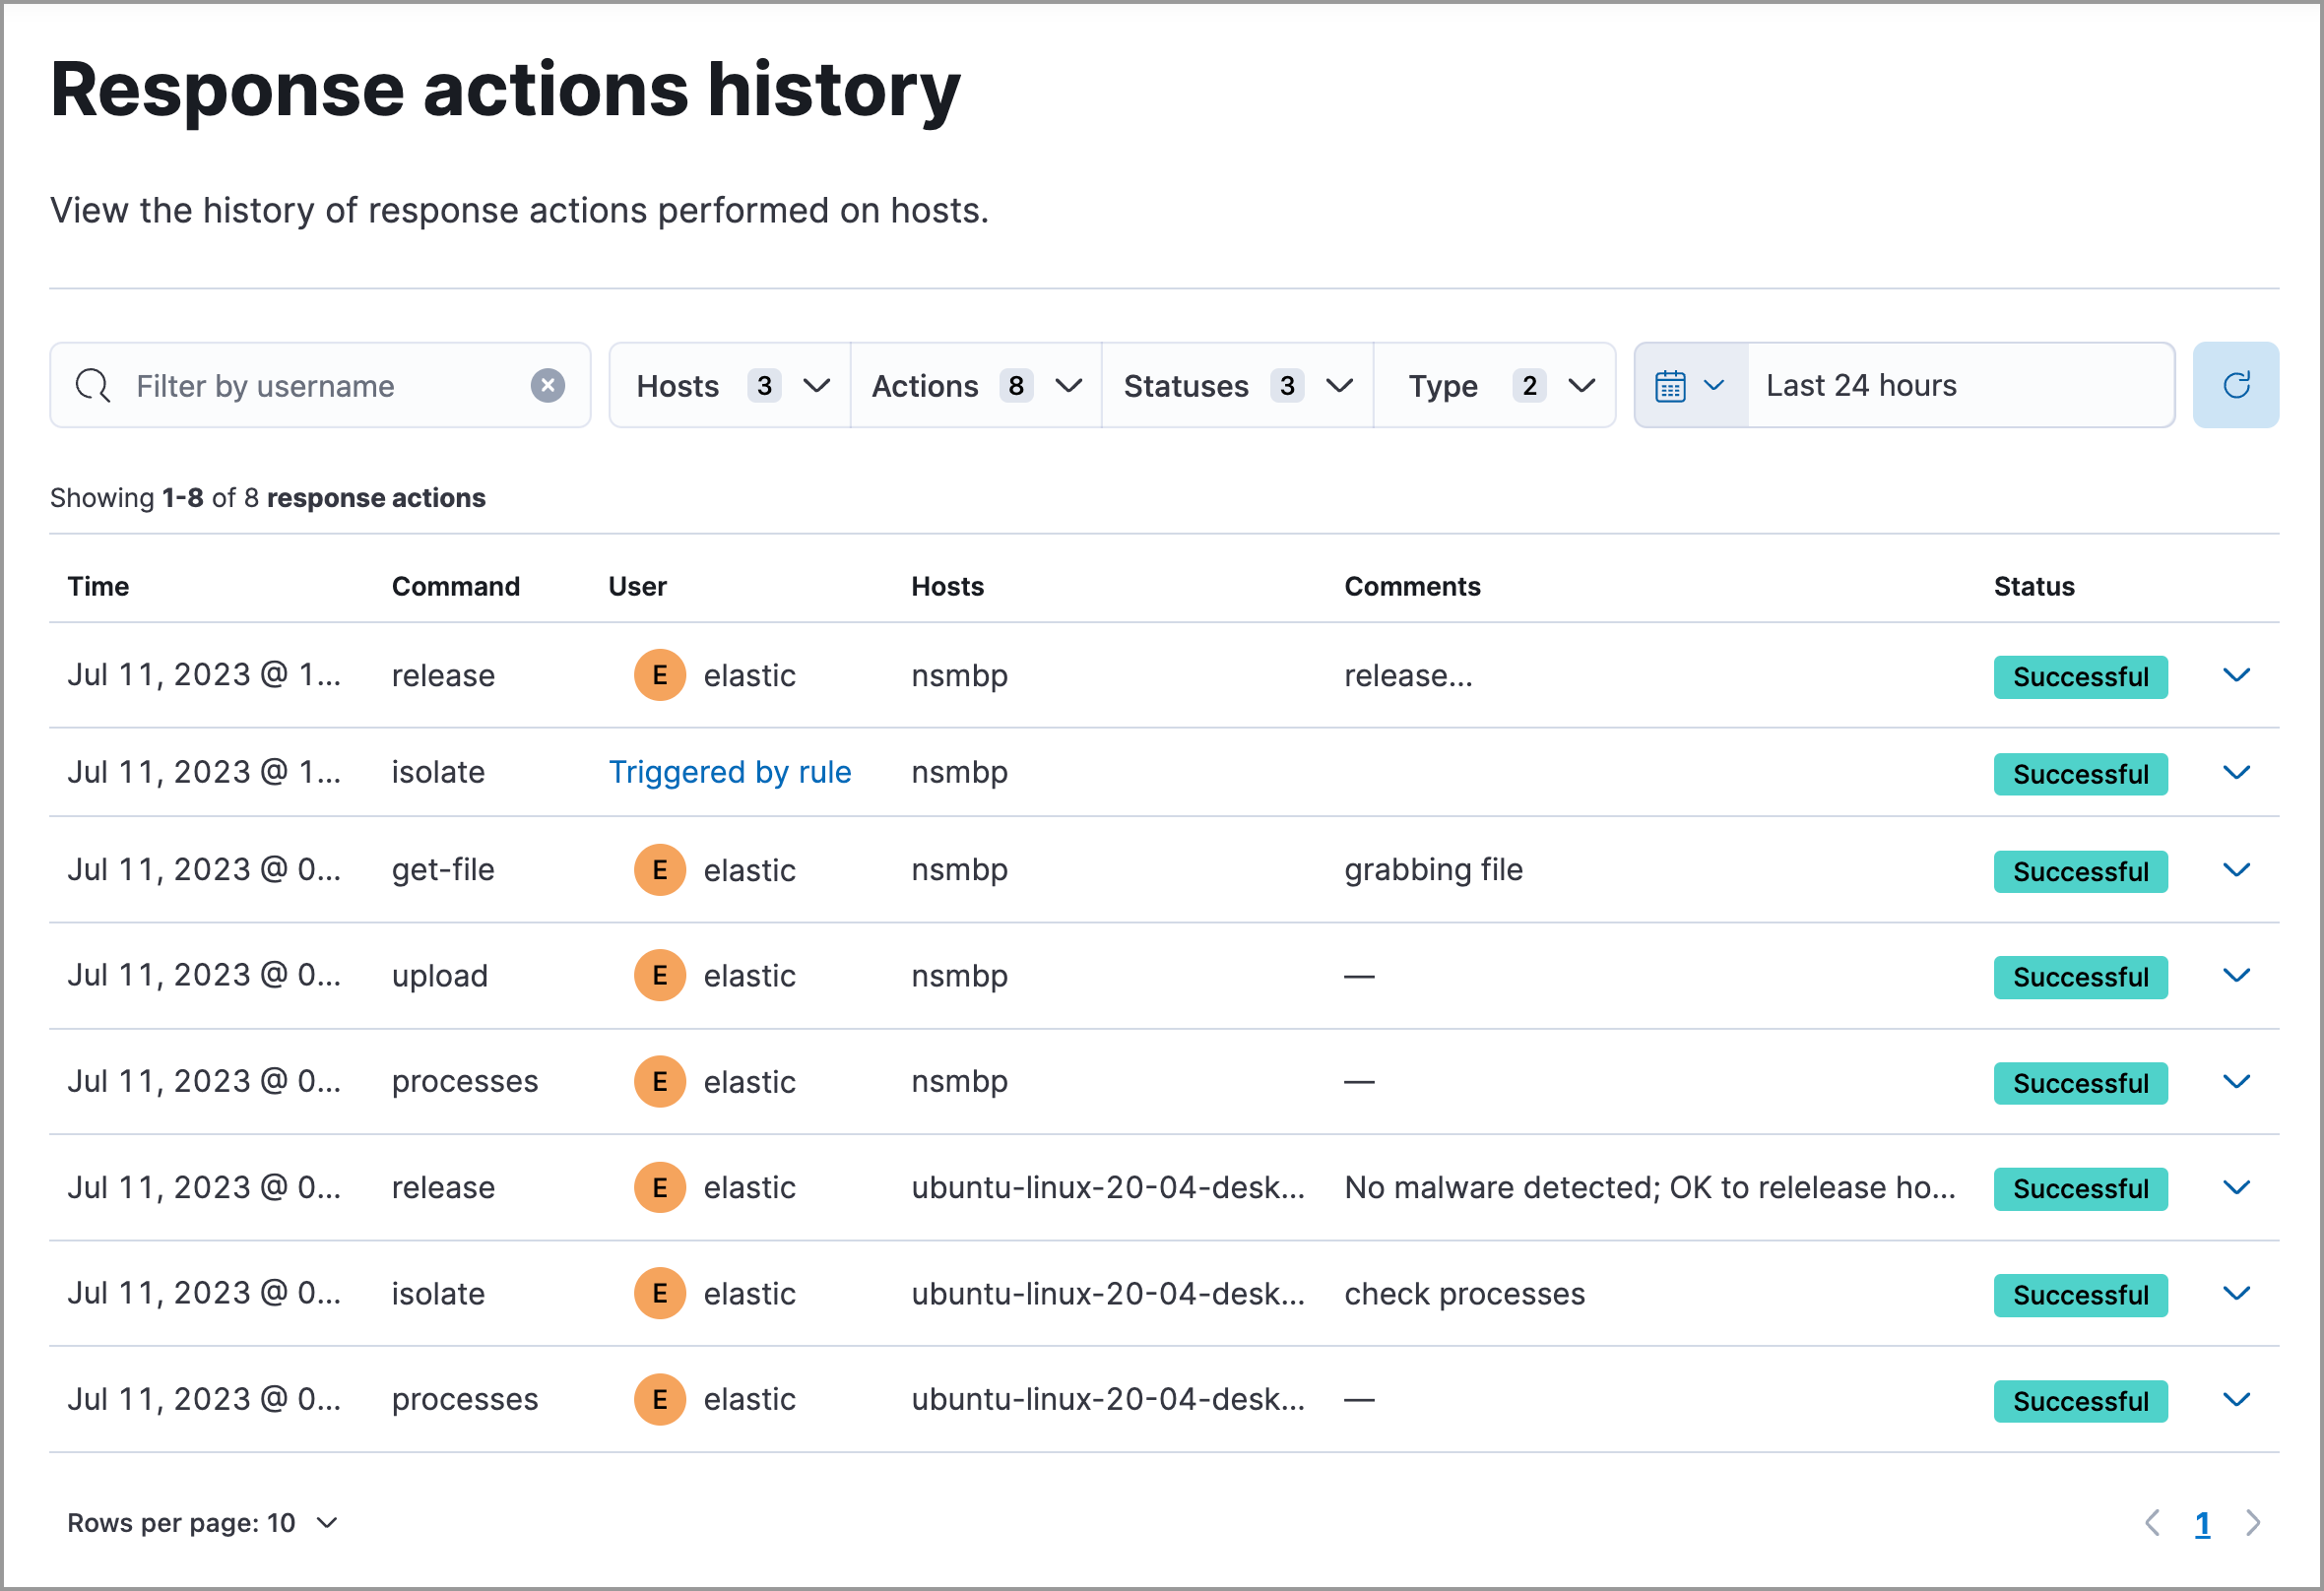 Response actions history page UI